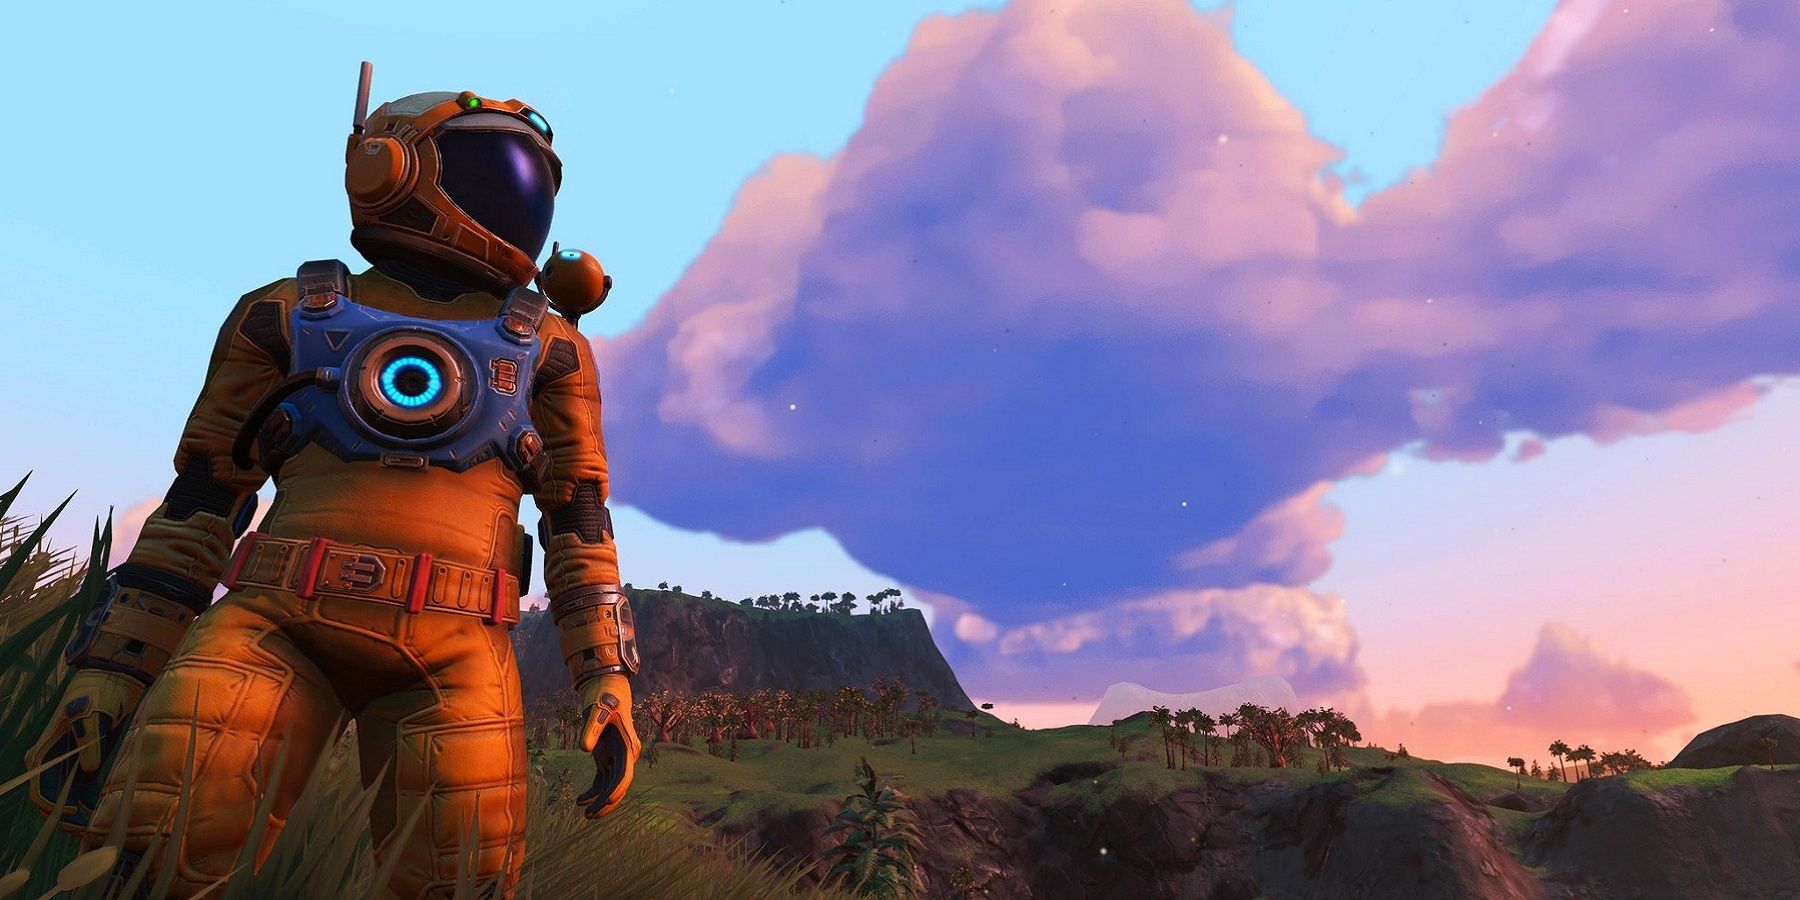 An image from No Man's Sky showing the Traveller on a pleasant Earth-like planet.